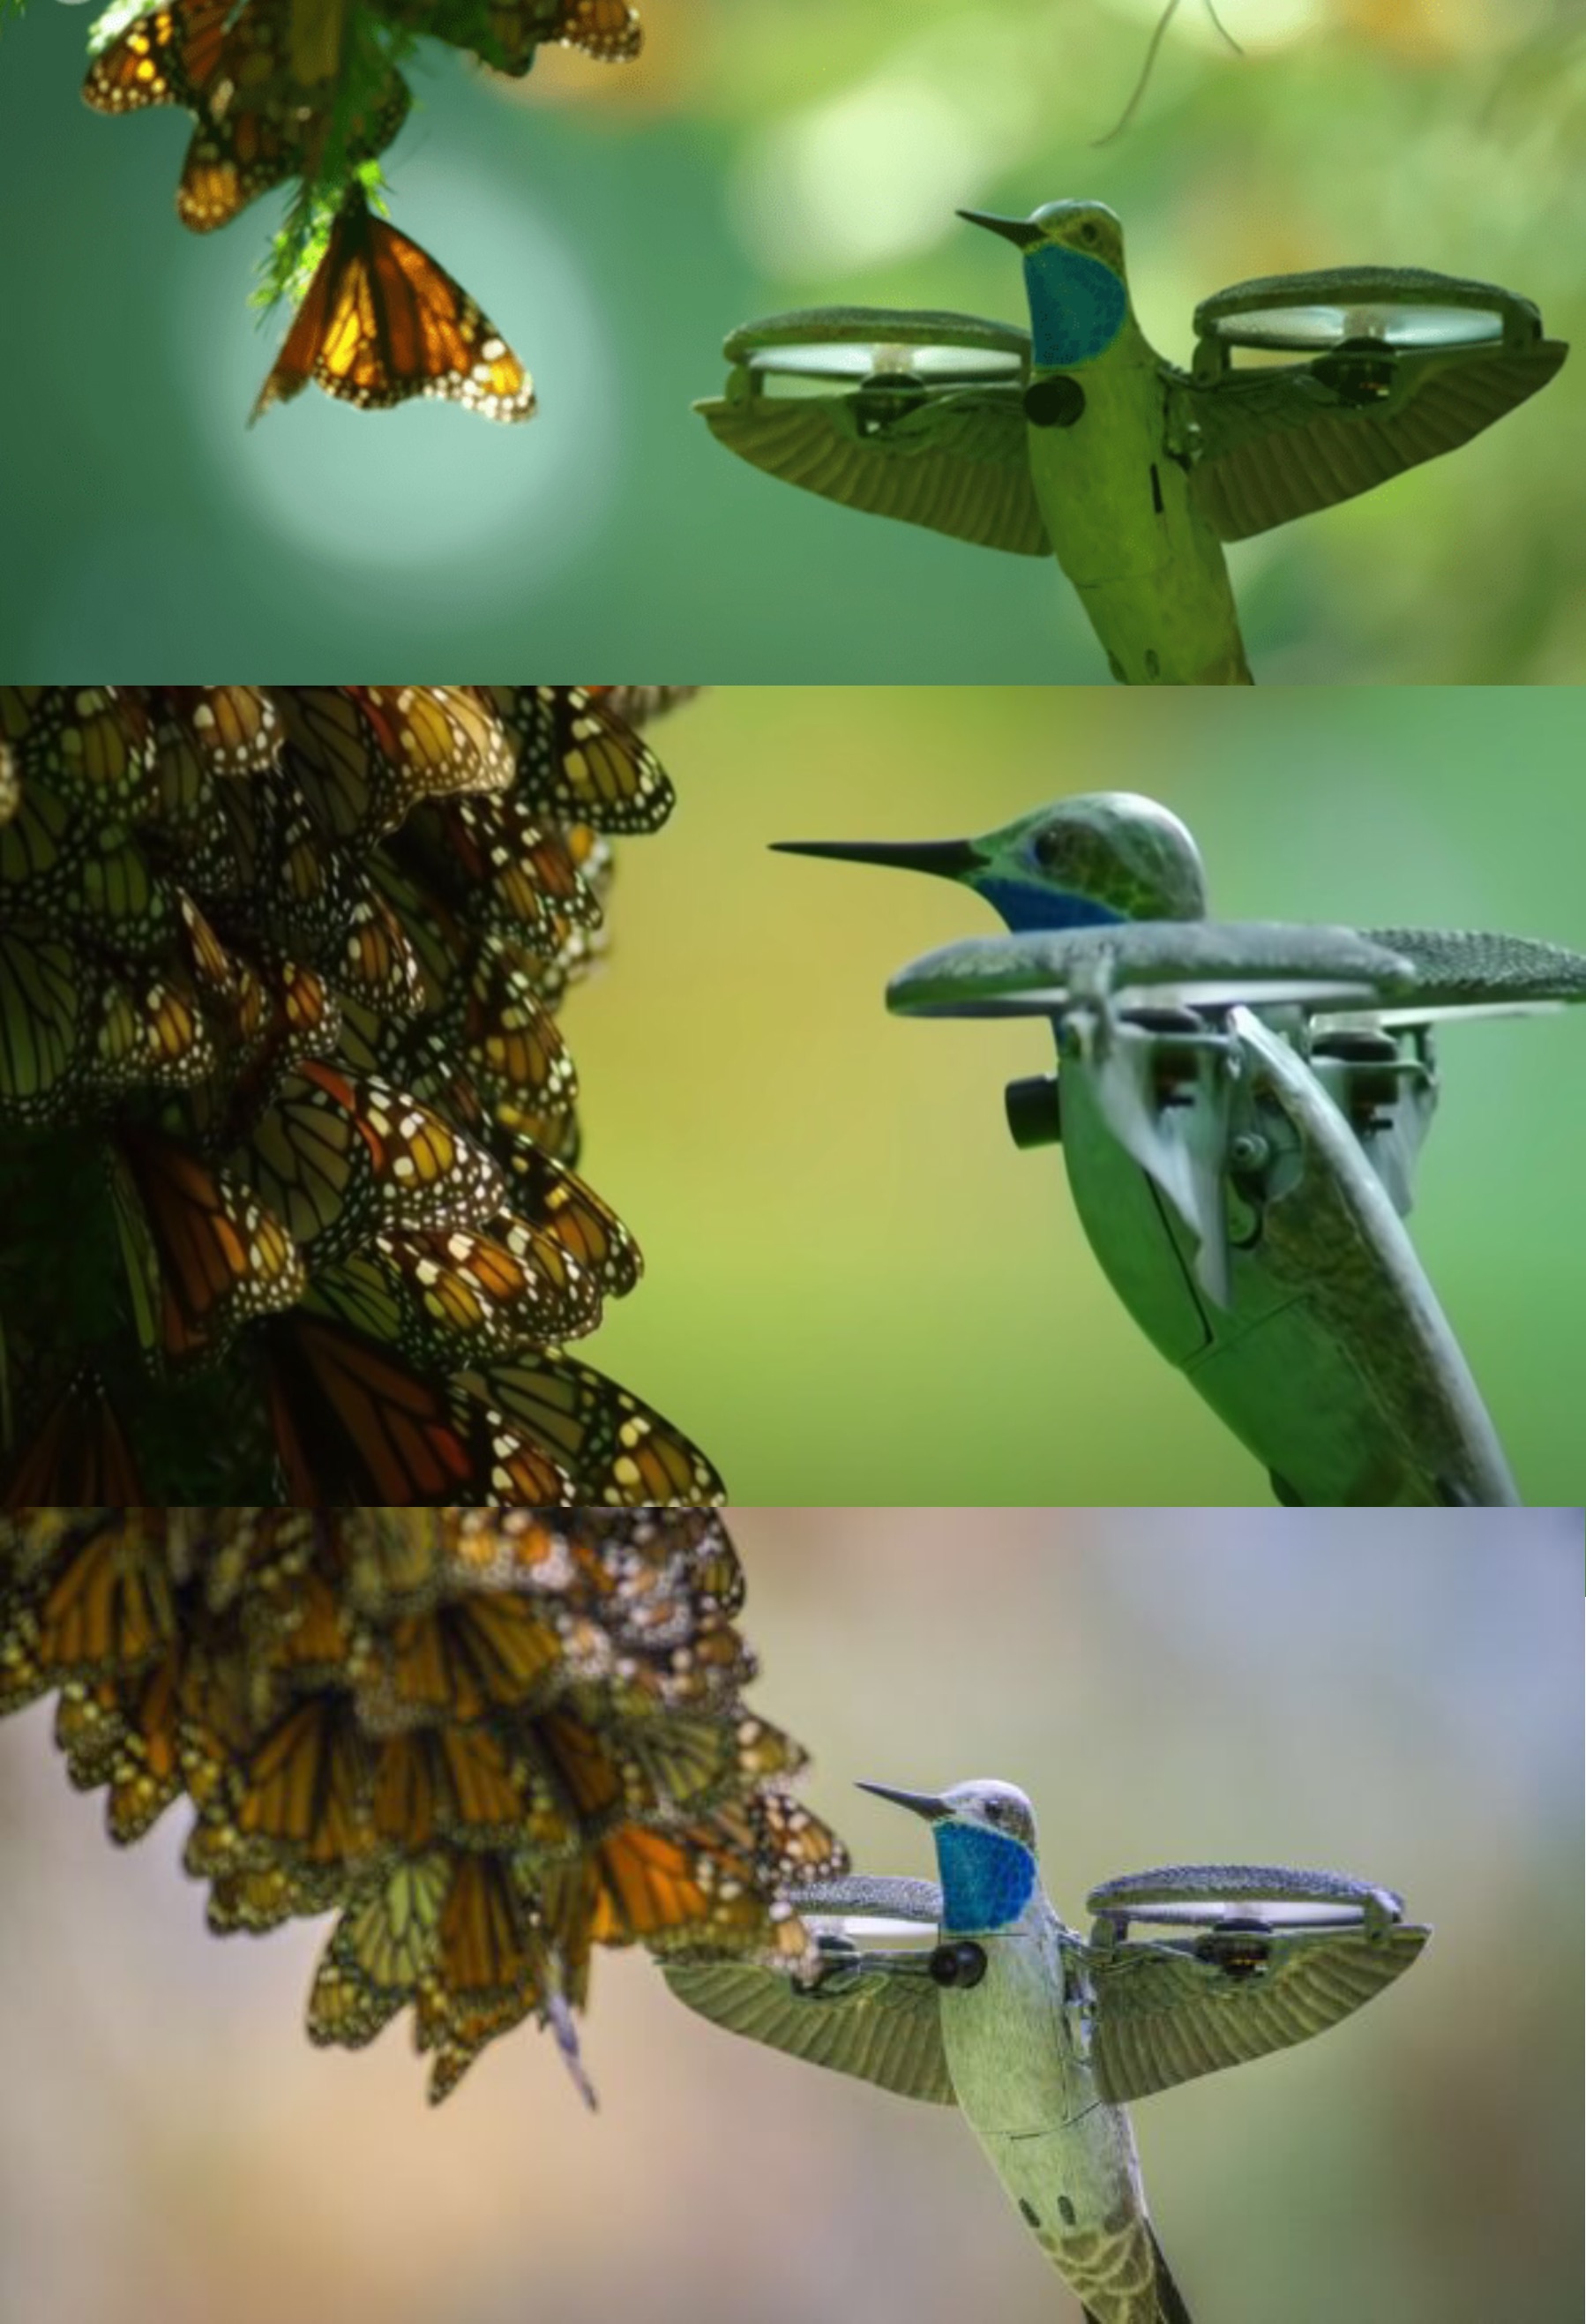 In the mountains of Mexico, a spy hummingbird ventures into the heart of a breathtaking monarch butterfly swarm. Few filmmakers have been able to capture the spectacle this closely.